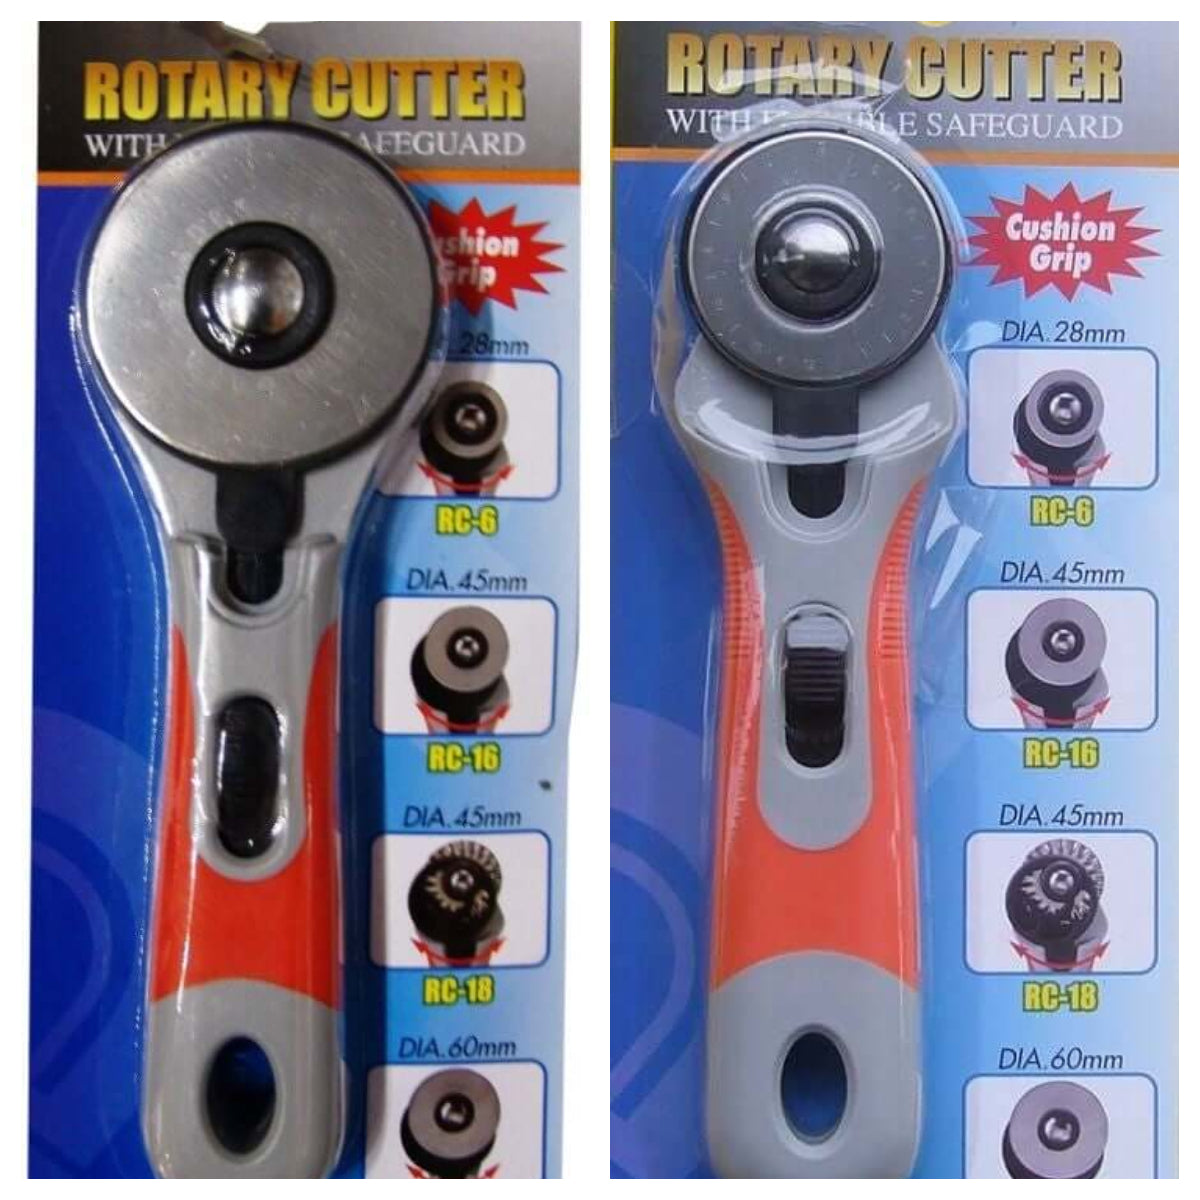 Dafa 28 /45/60 mm Rotary Cutter, sewing, crafts. With flexible safeguard and soft grip handle.